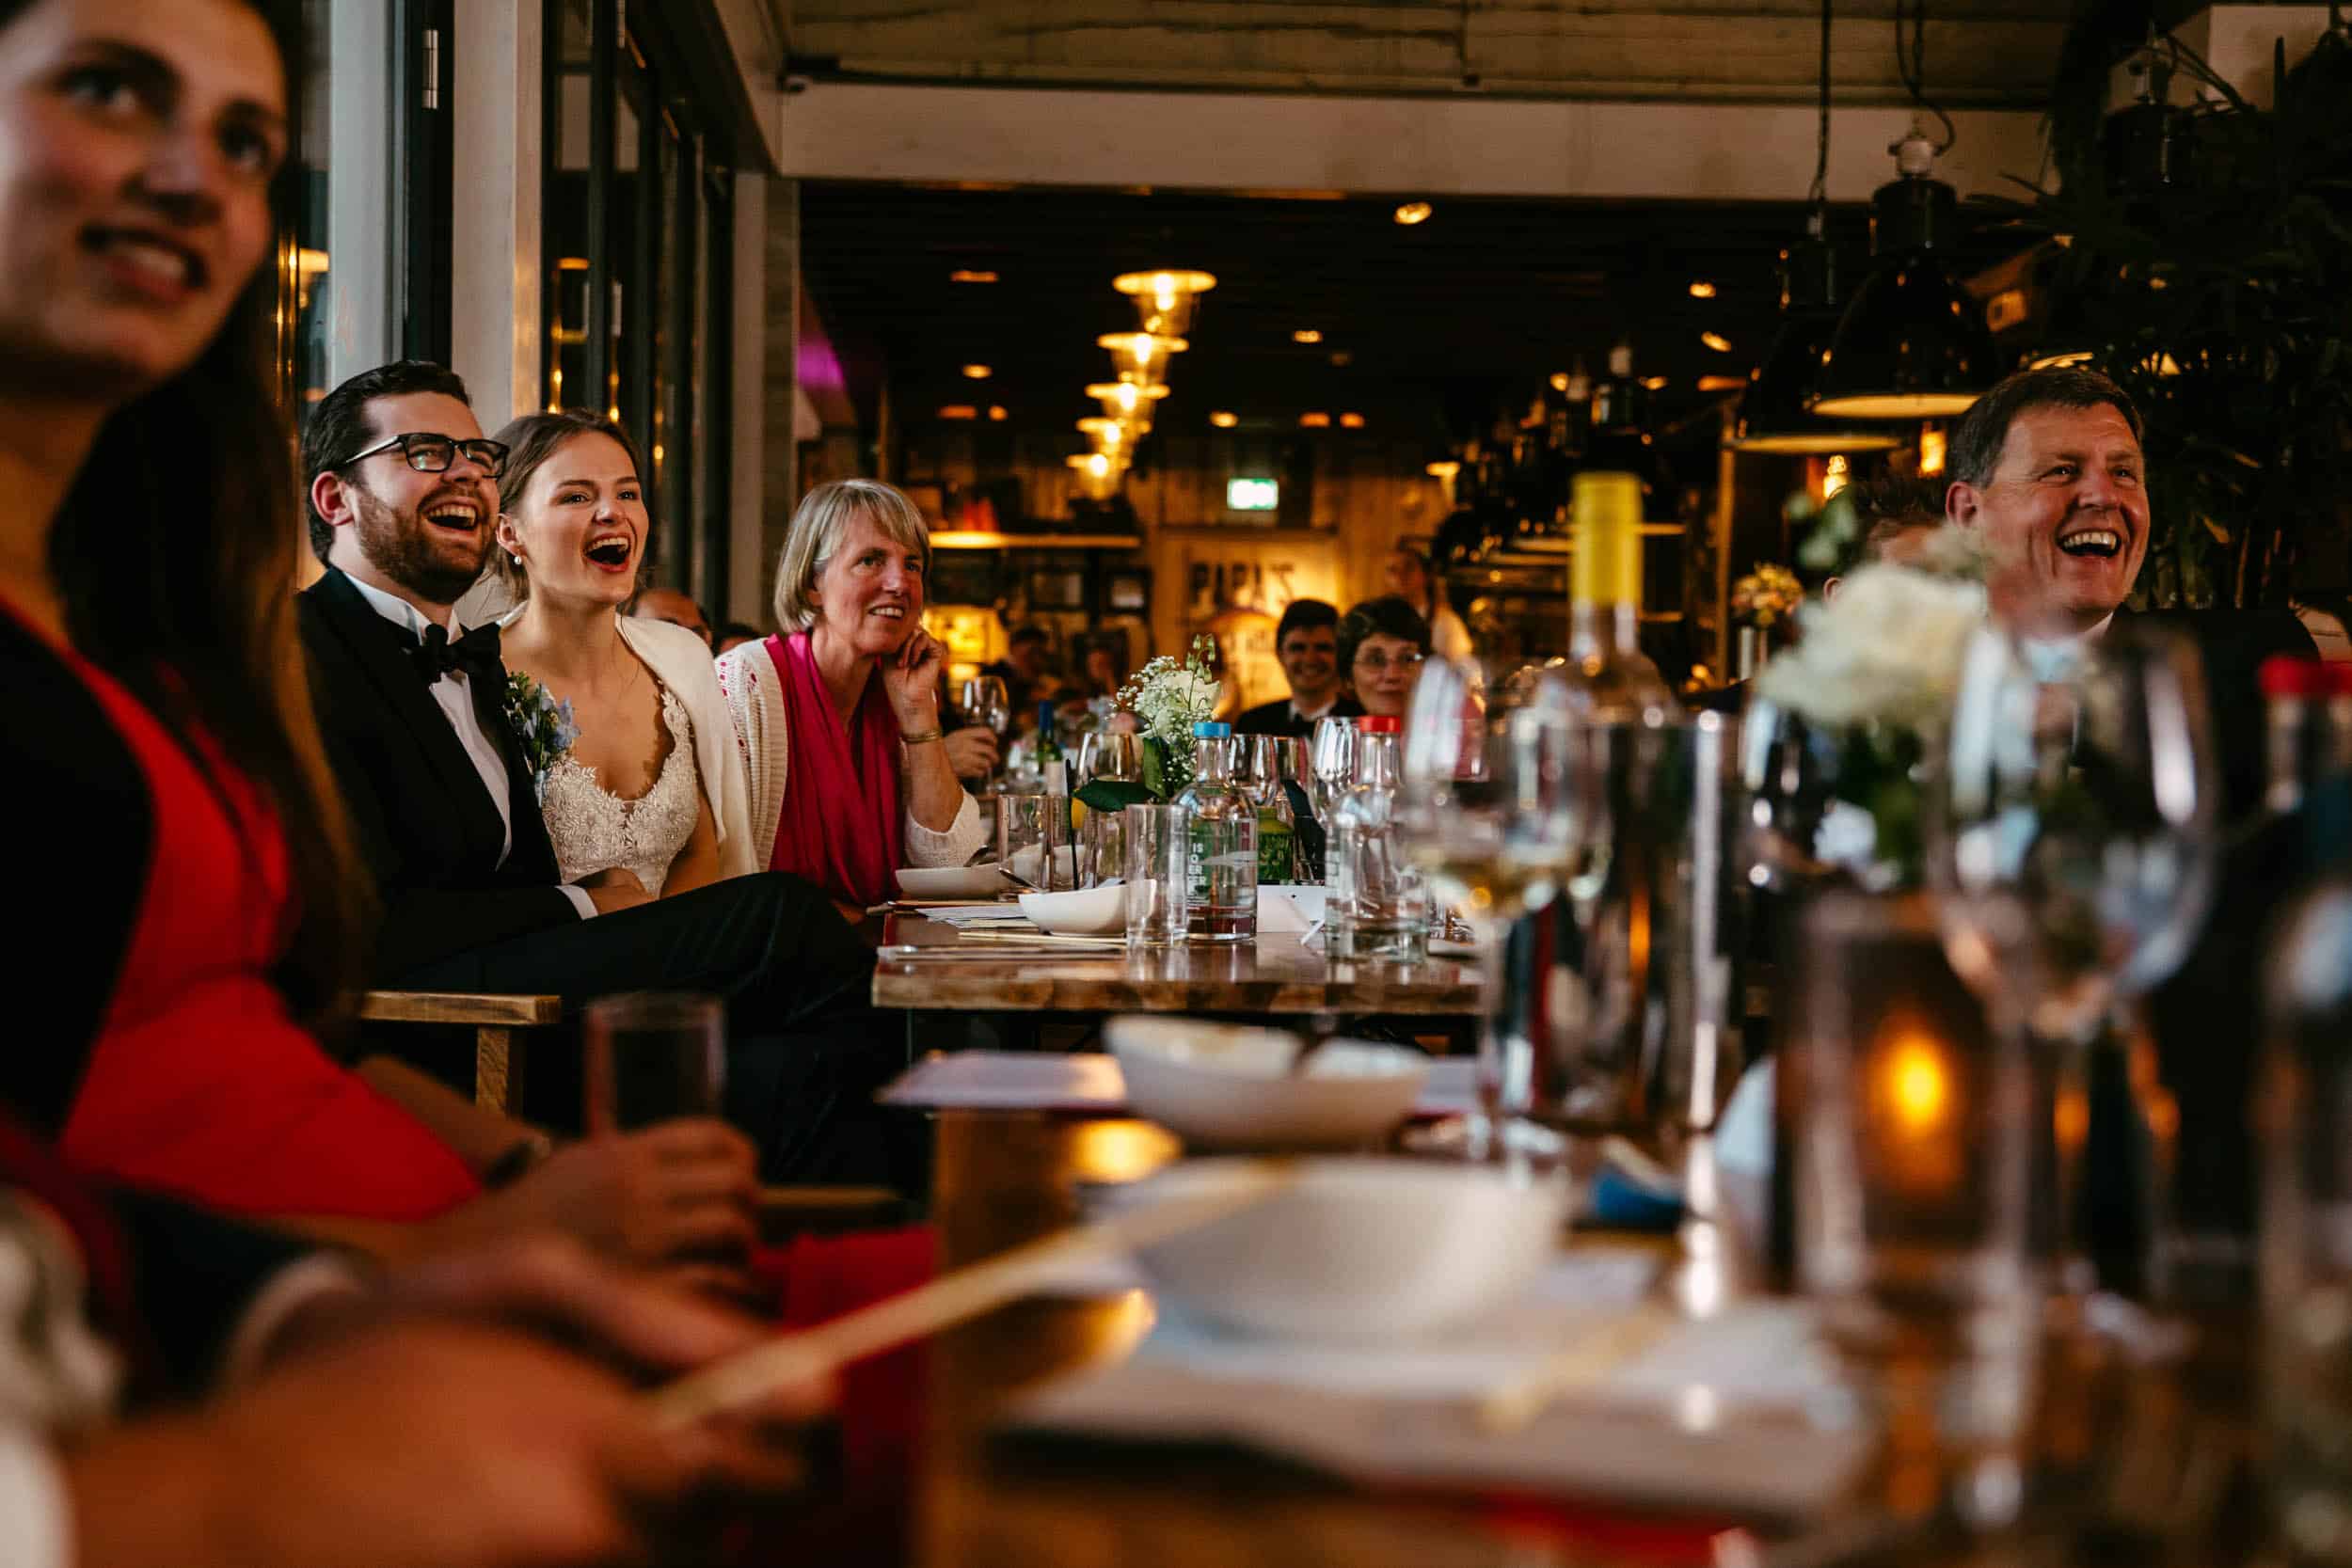 A group of people laughing at a restaurant table during a Wedding Ceremony at the Delft Botanical Garden.